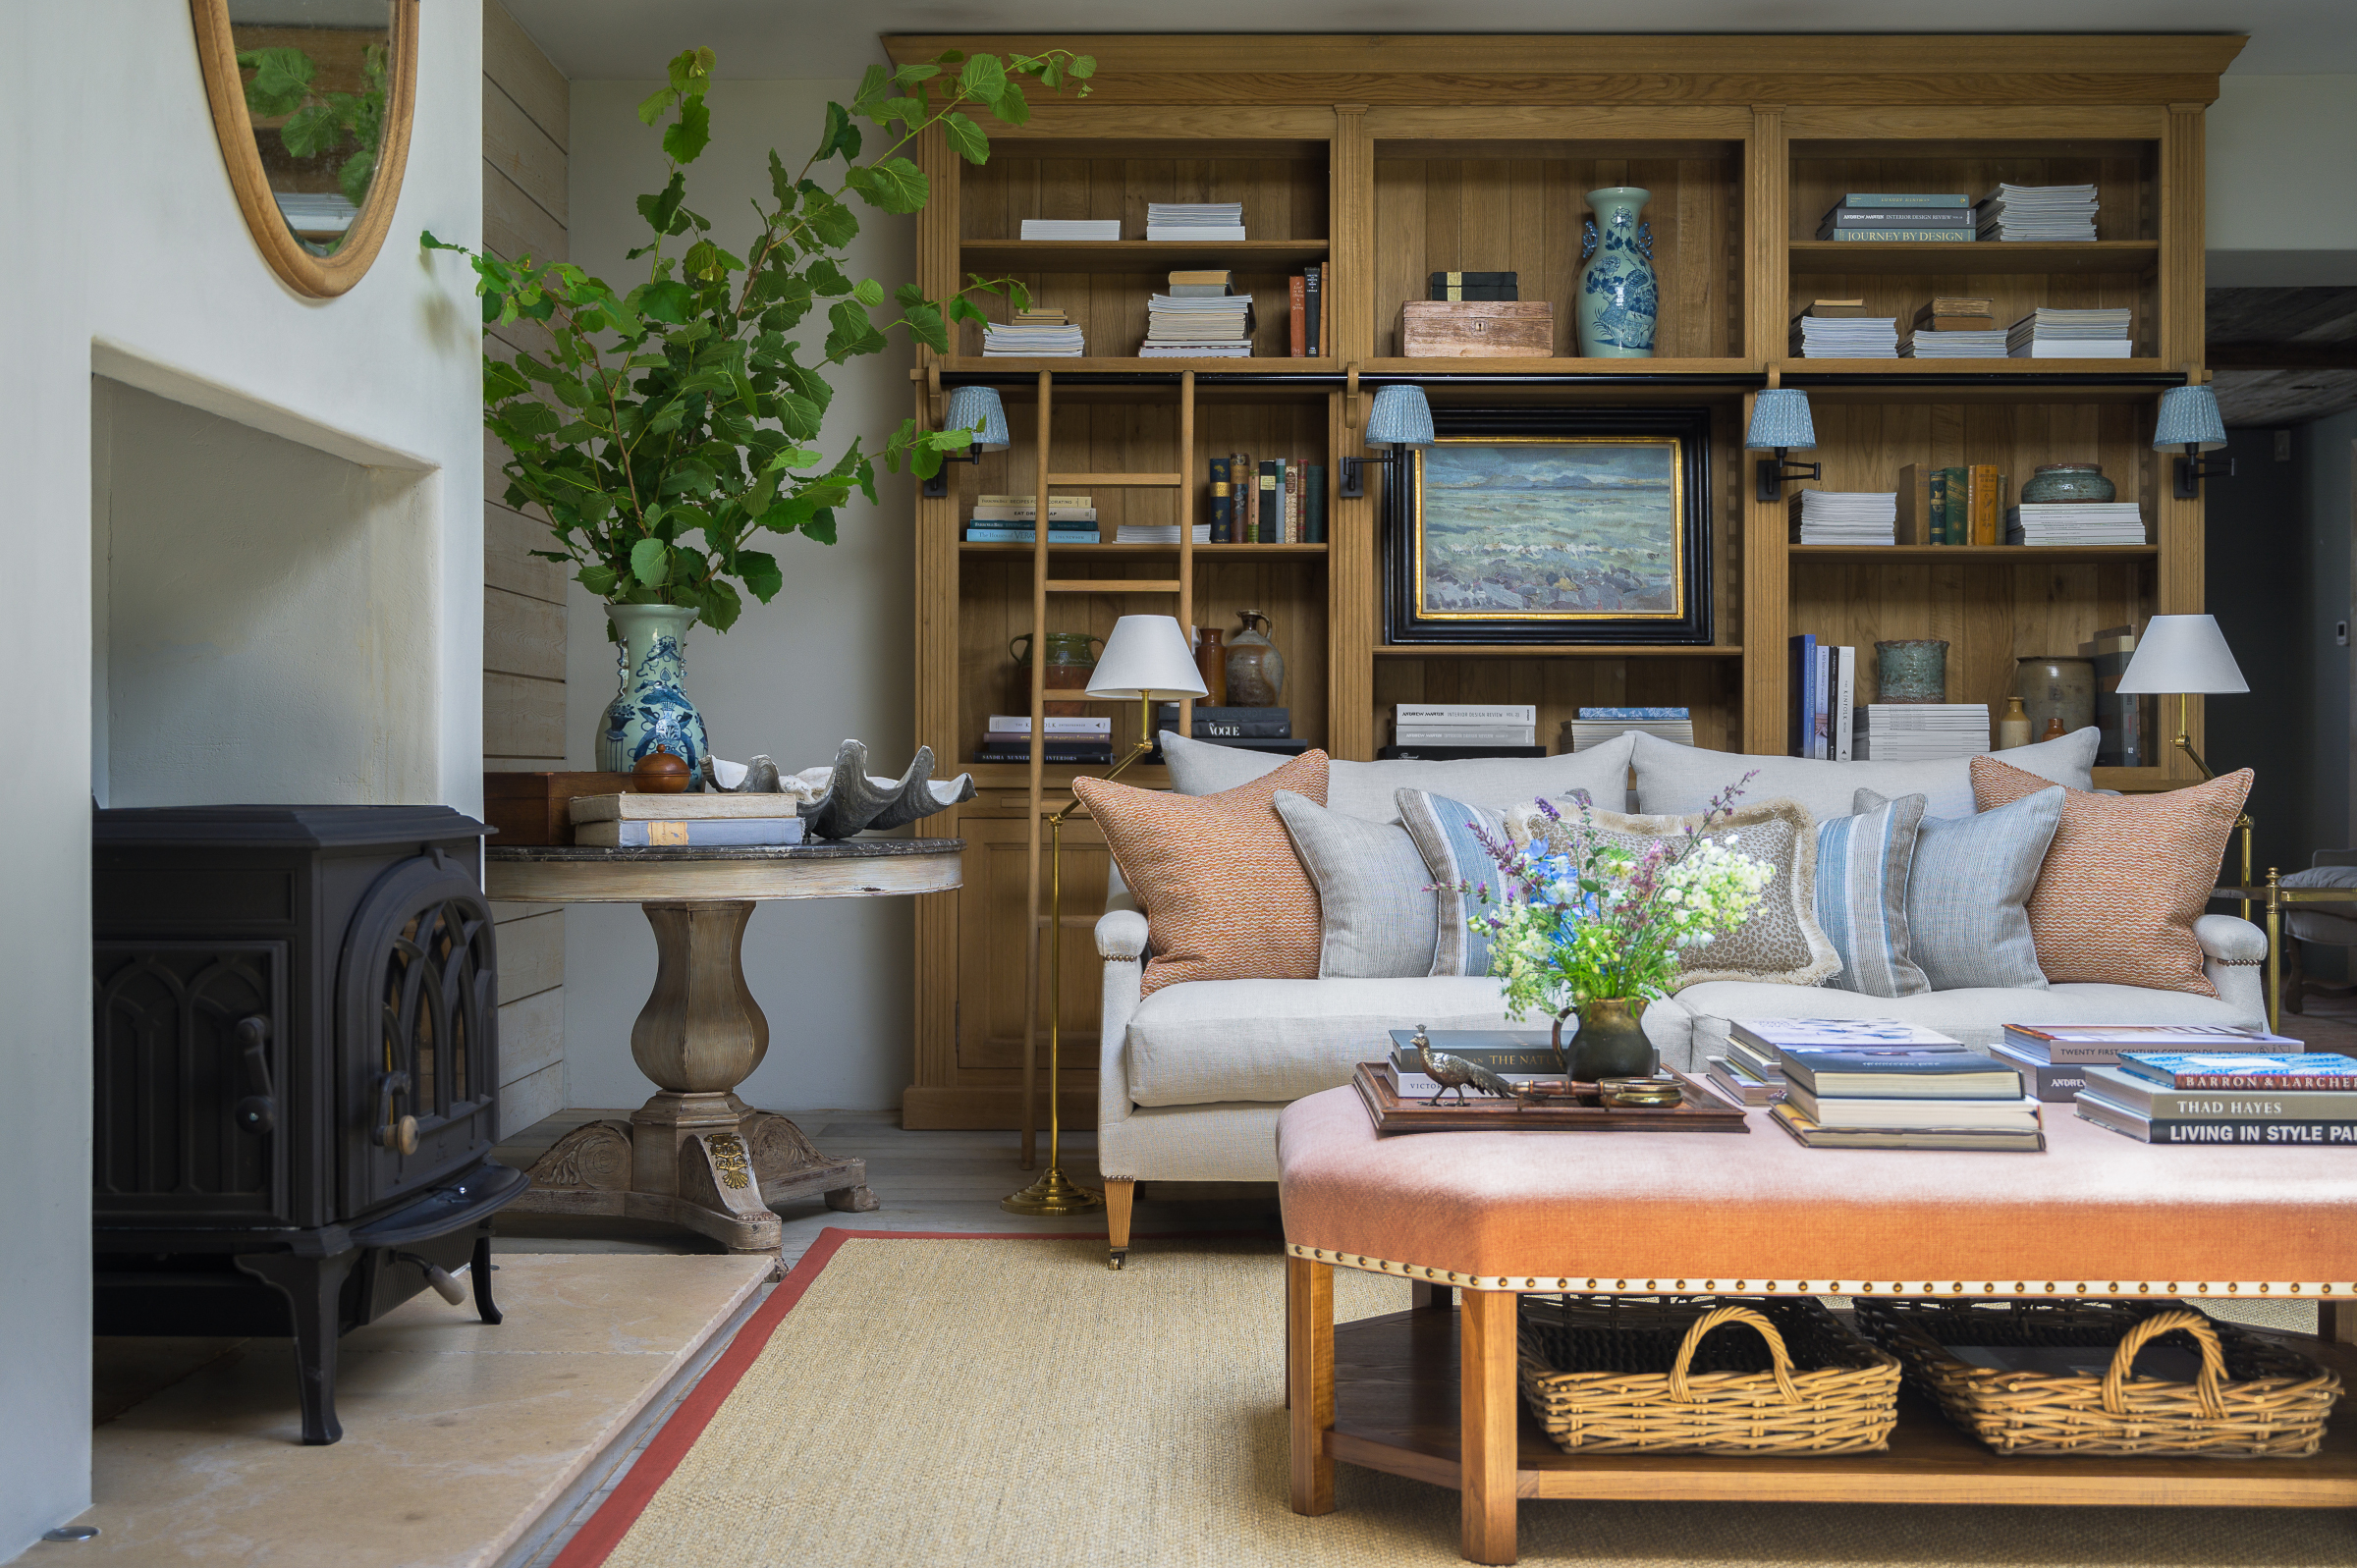 Home Library Ideas Out of an Interior Designer's Playbook